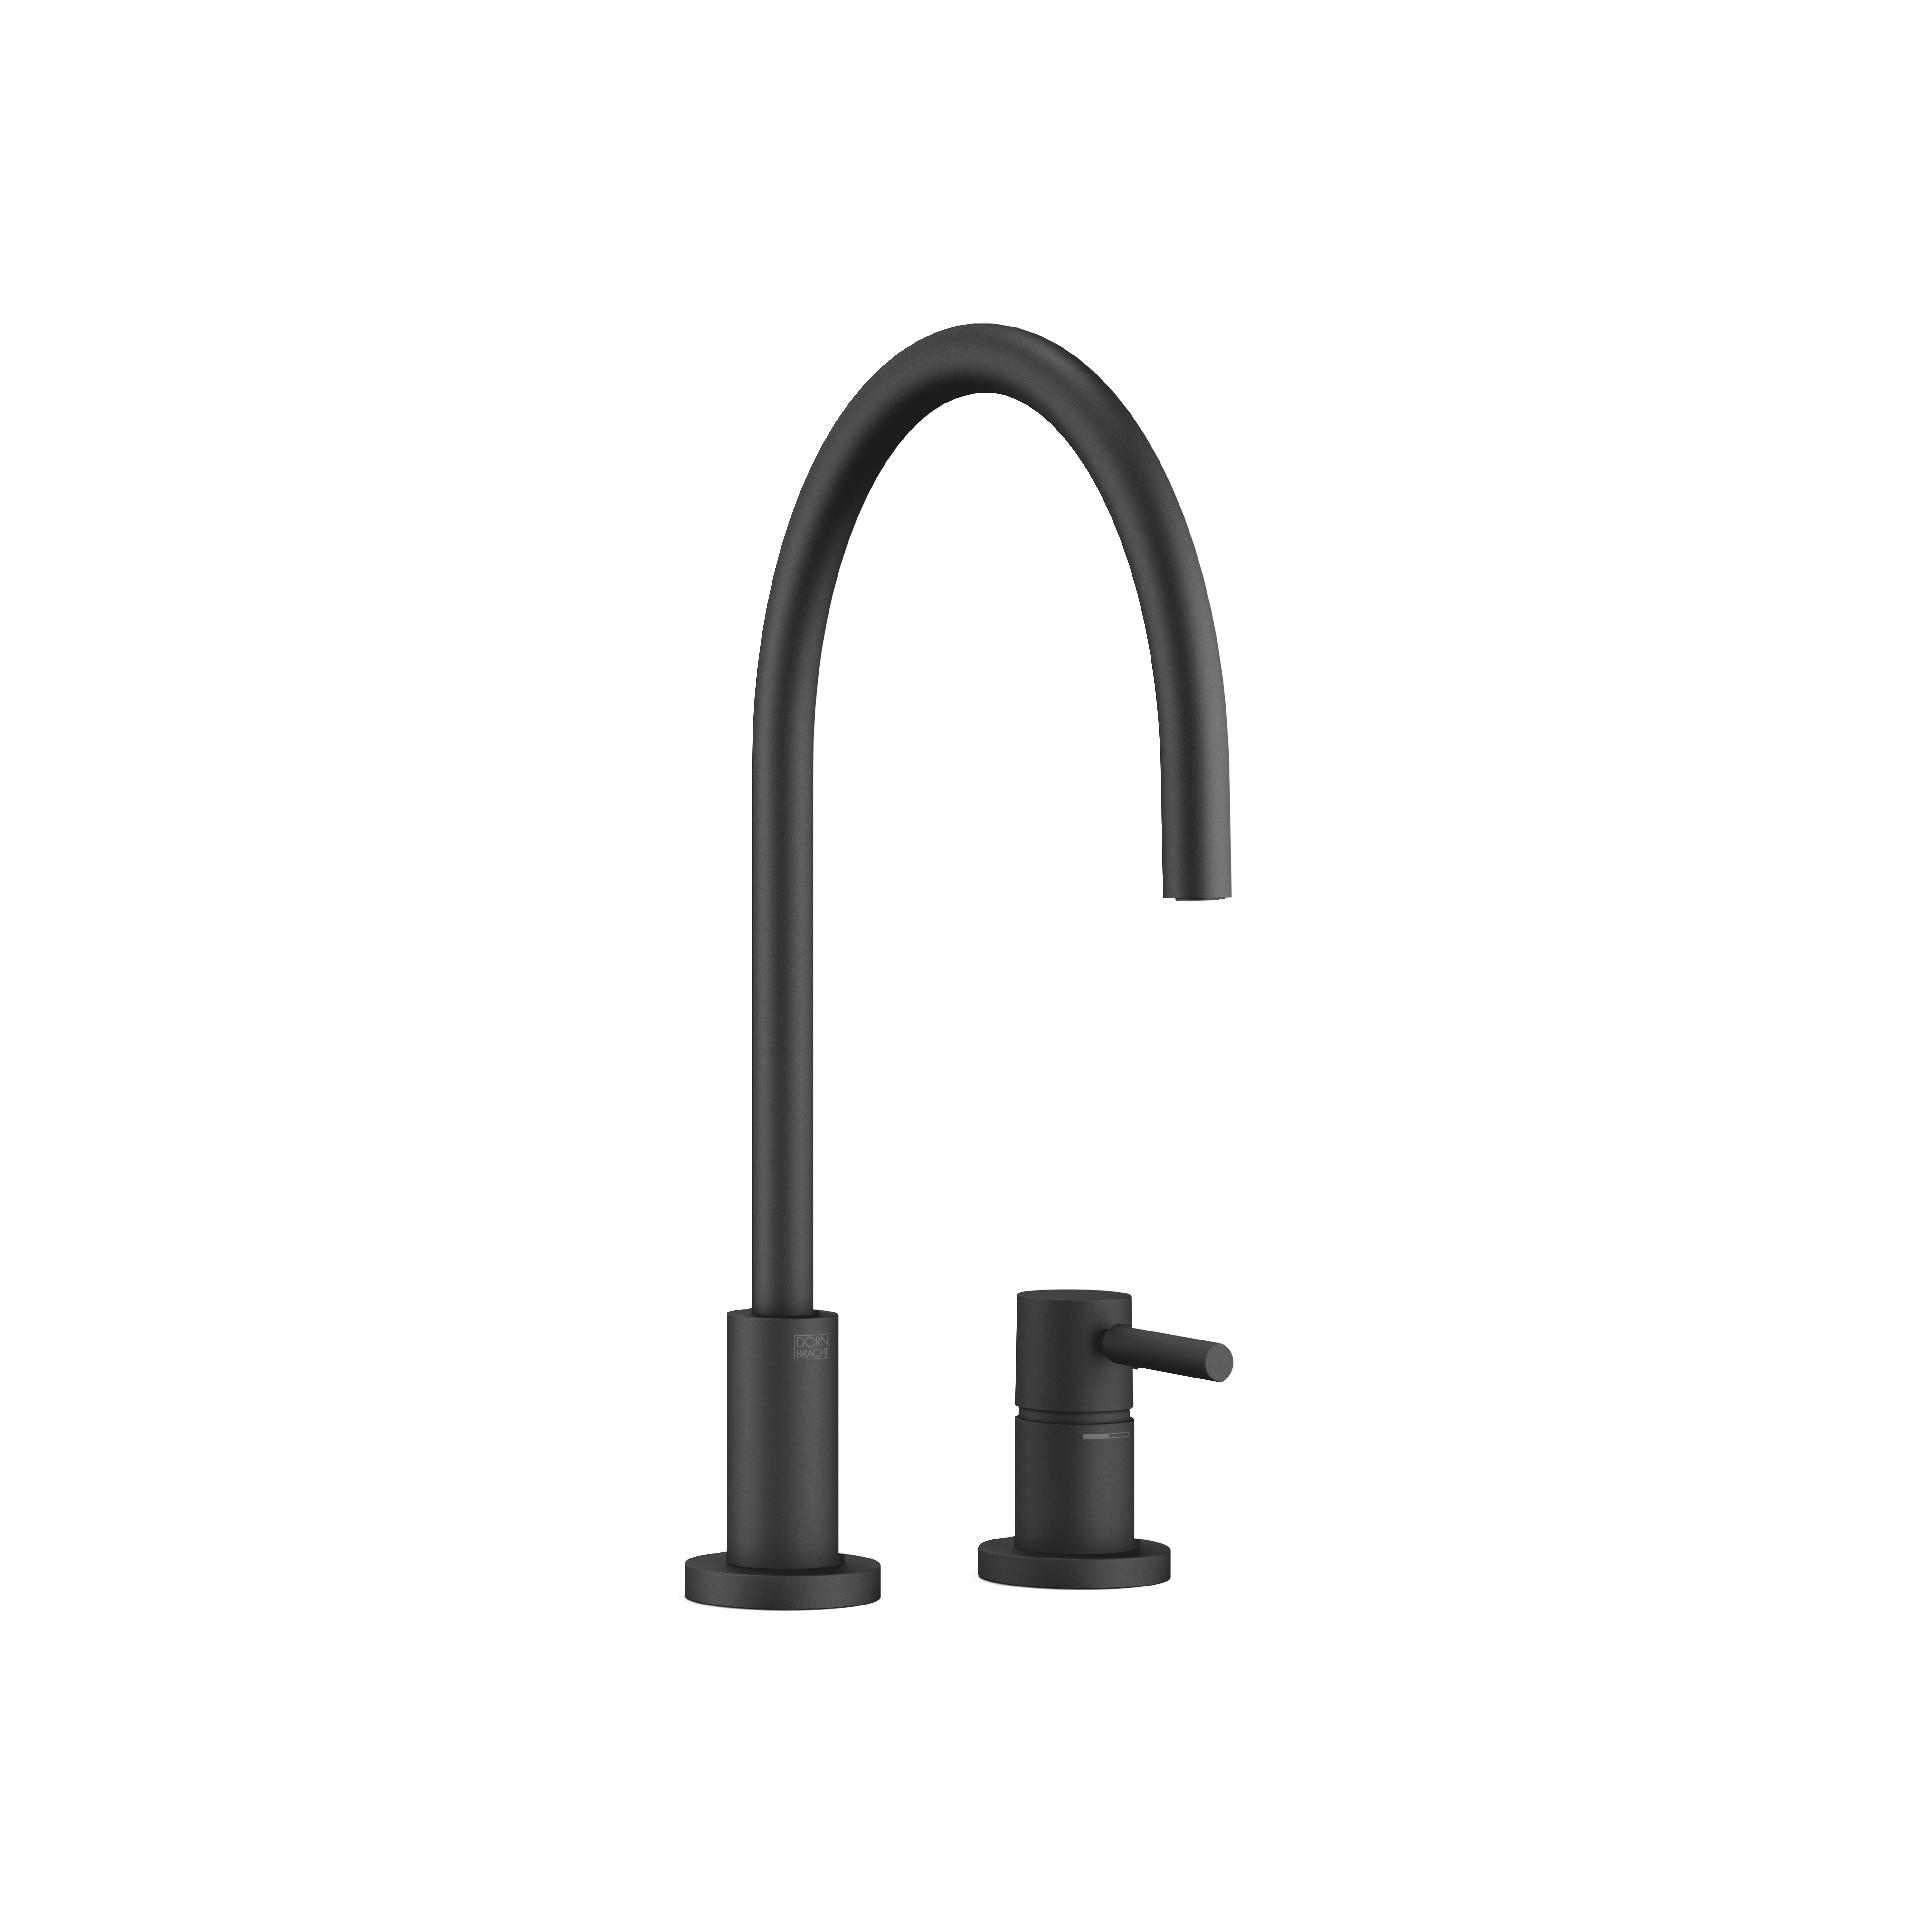 TARA Chrome Kitchen faucets: Two-hole mixer with individual rosettes